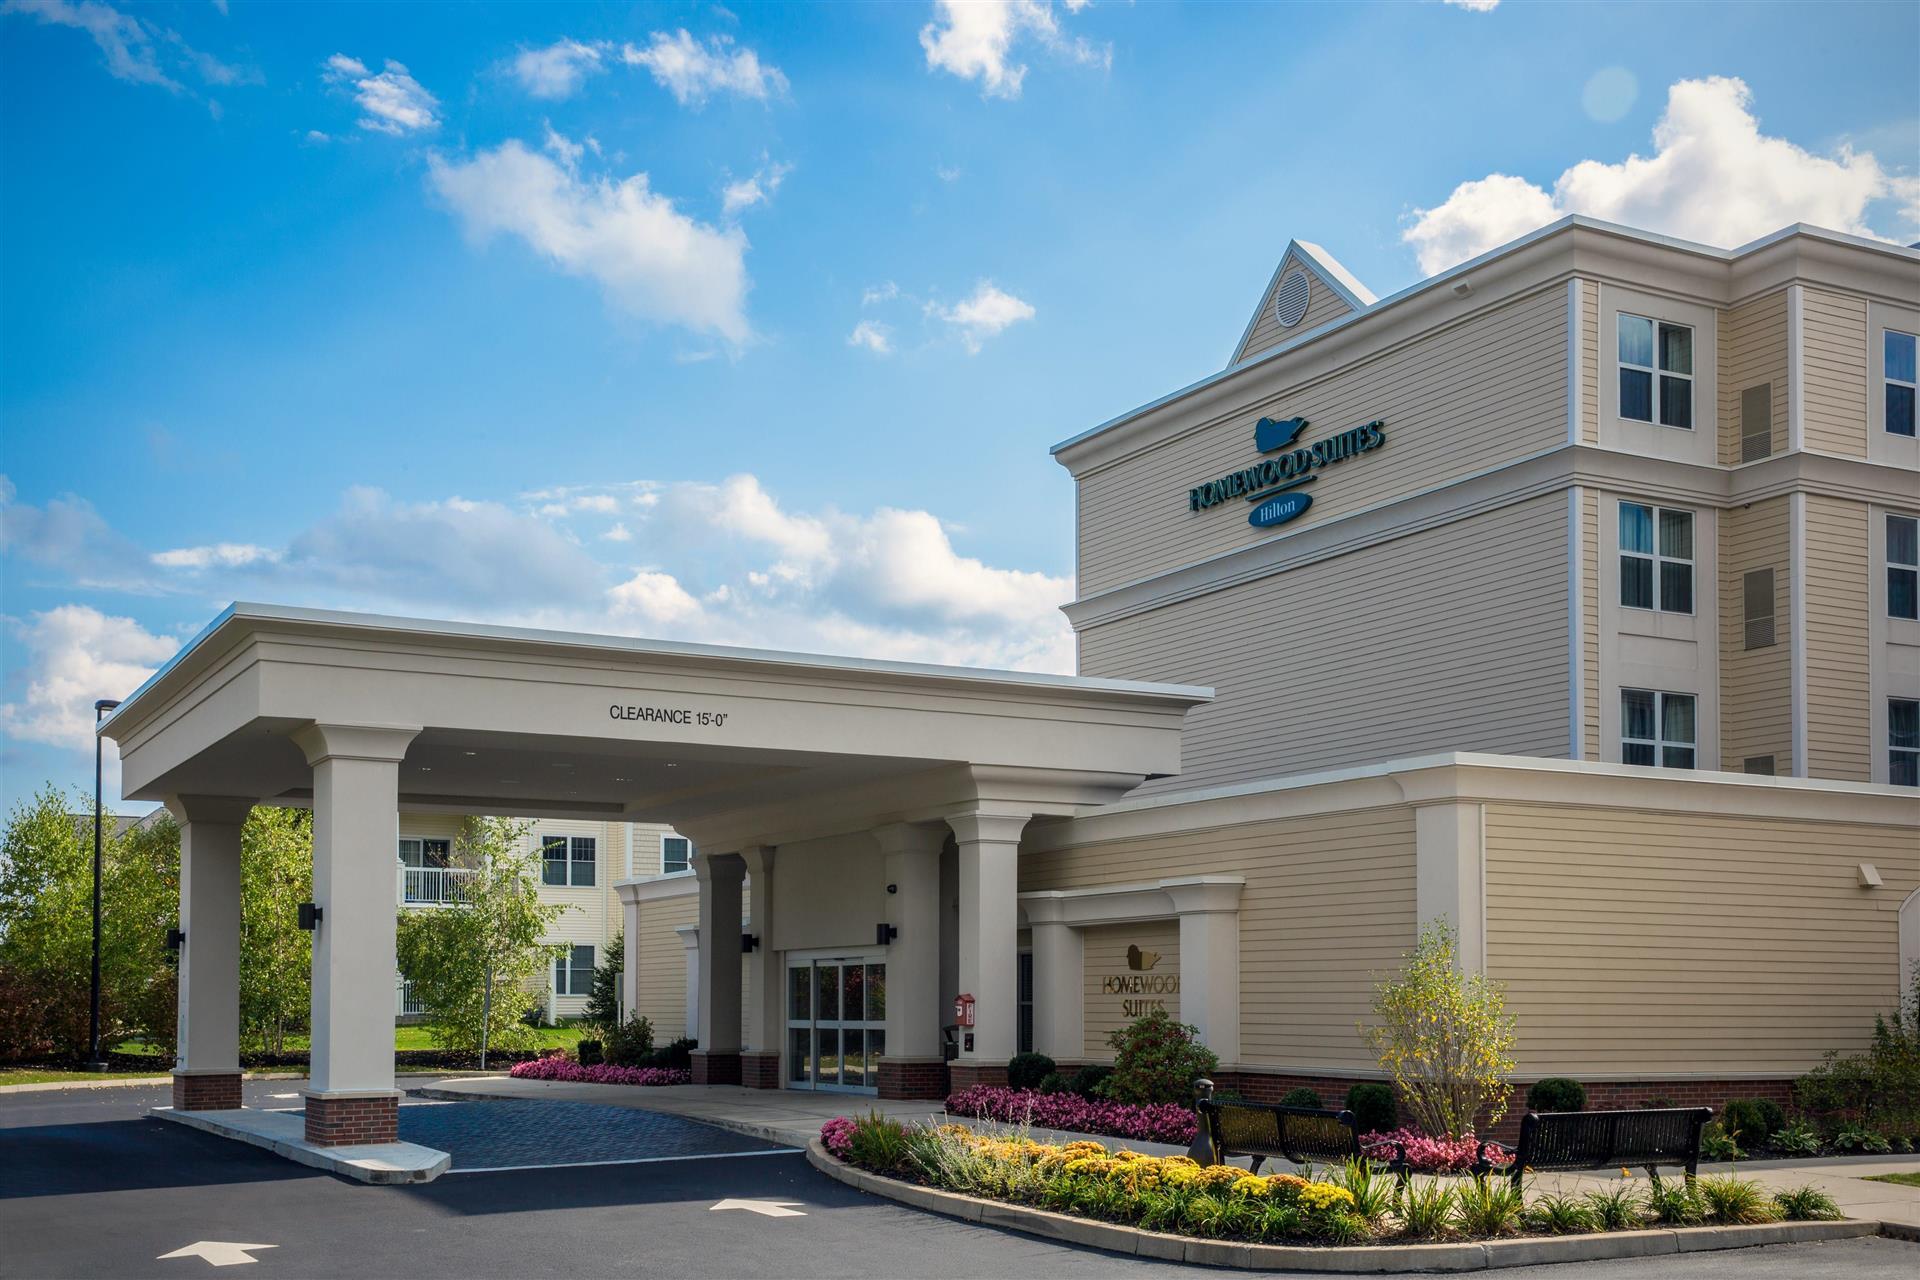 Homewood Suites by Hilton Boston/Canton, MA in Canton, MA